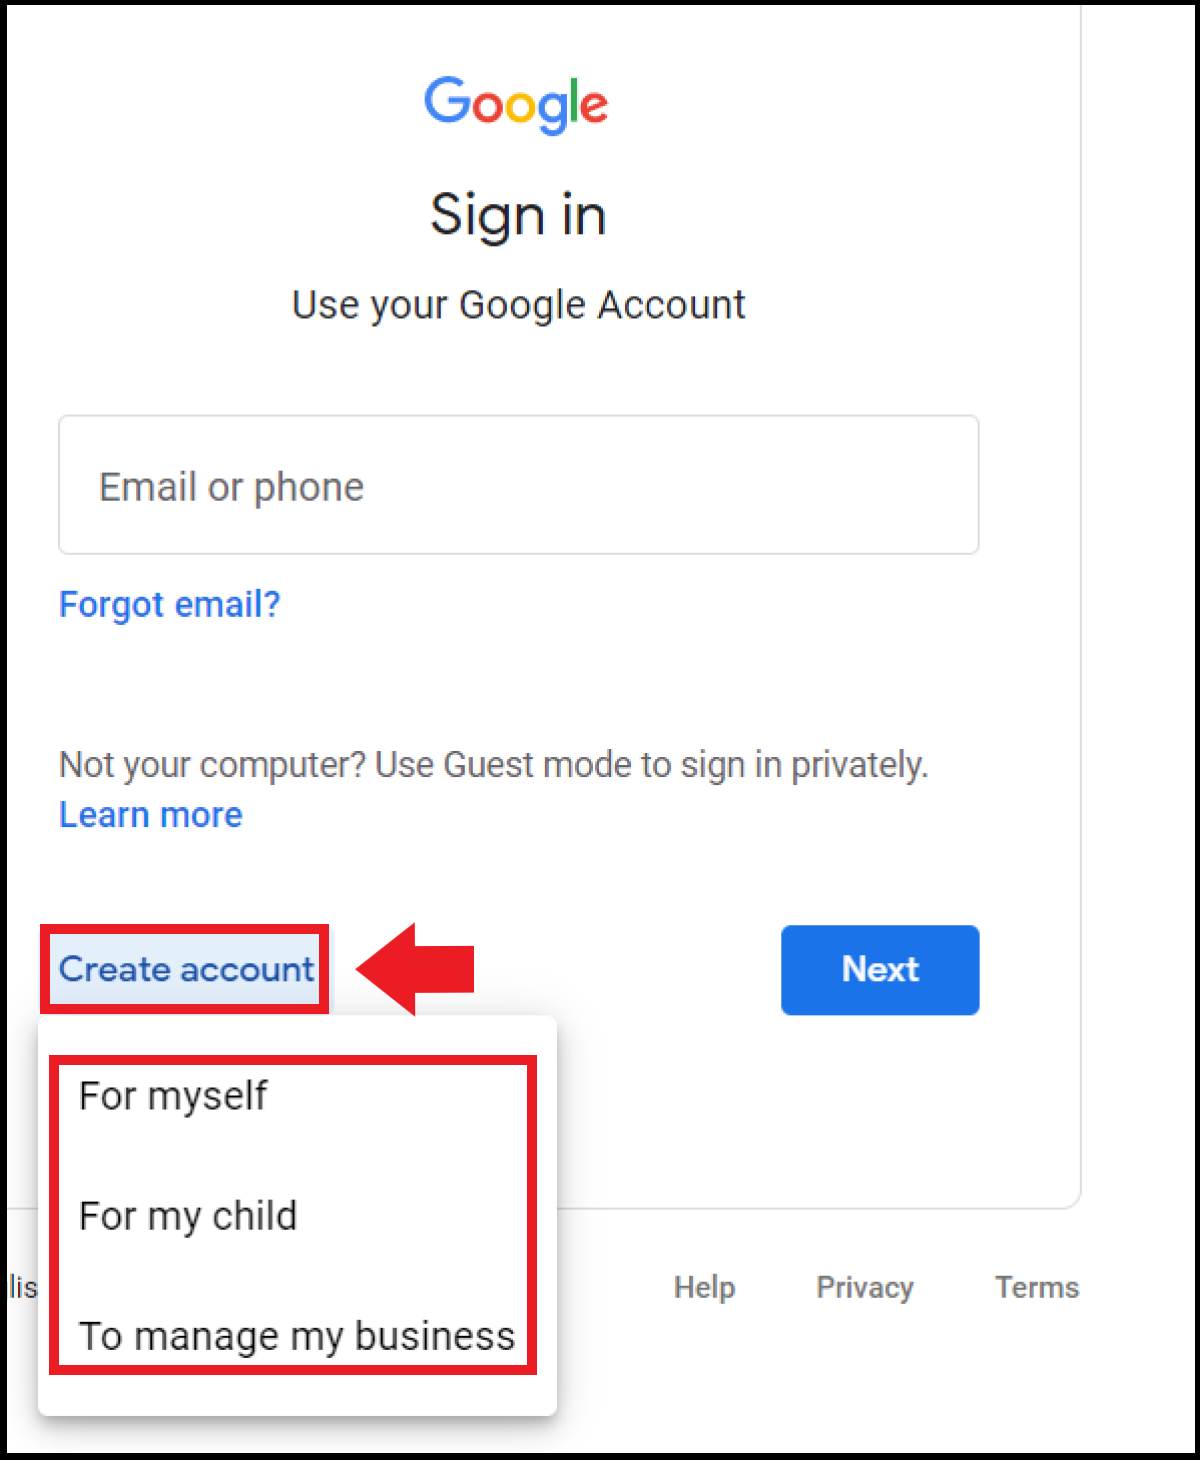 Sign up options via the Google sign in page